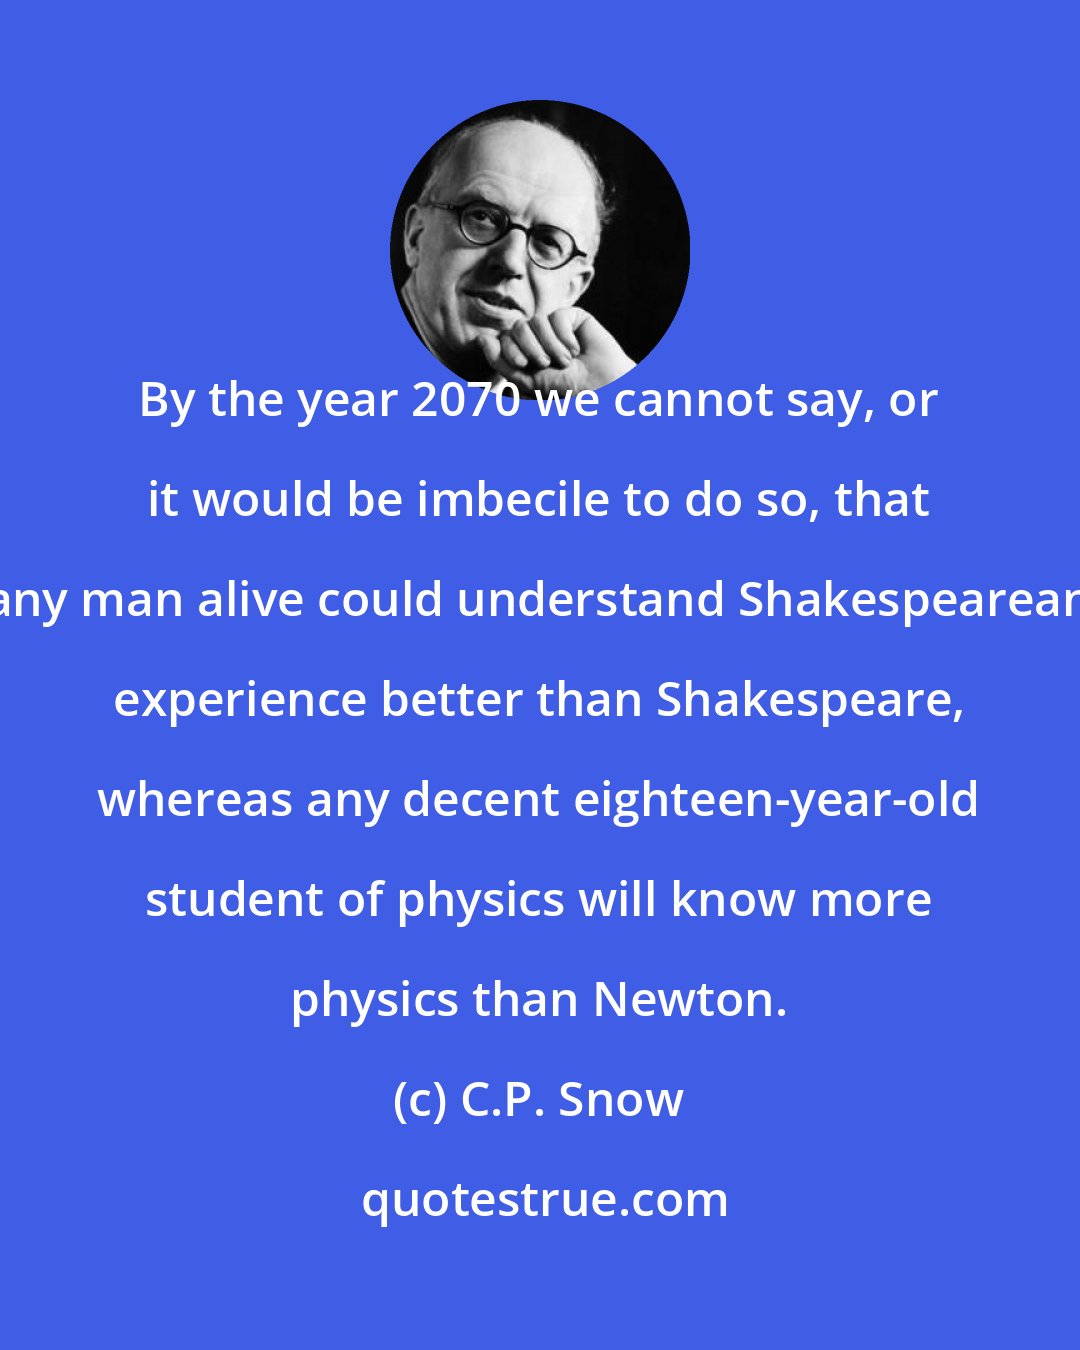 C.P. Snow: By the year 2070 we cannot say, or it would be imbecile to do so, that any man alive could understand Shakespearean experience better than Shakespeare, whereas any decent eighteen-year-old student of physics will know more physics than Newton.